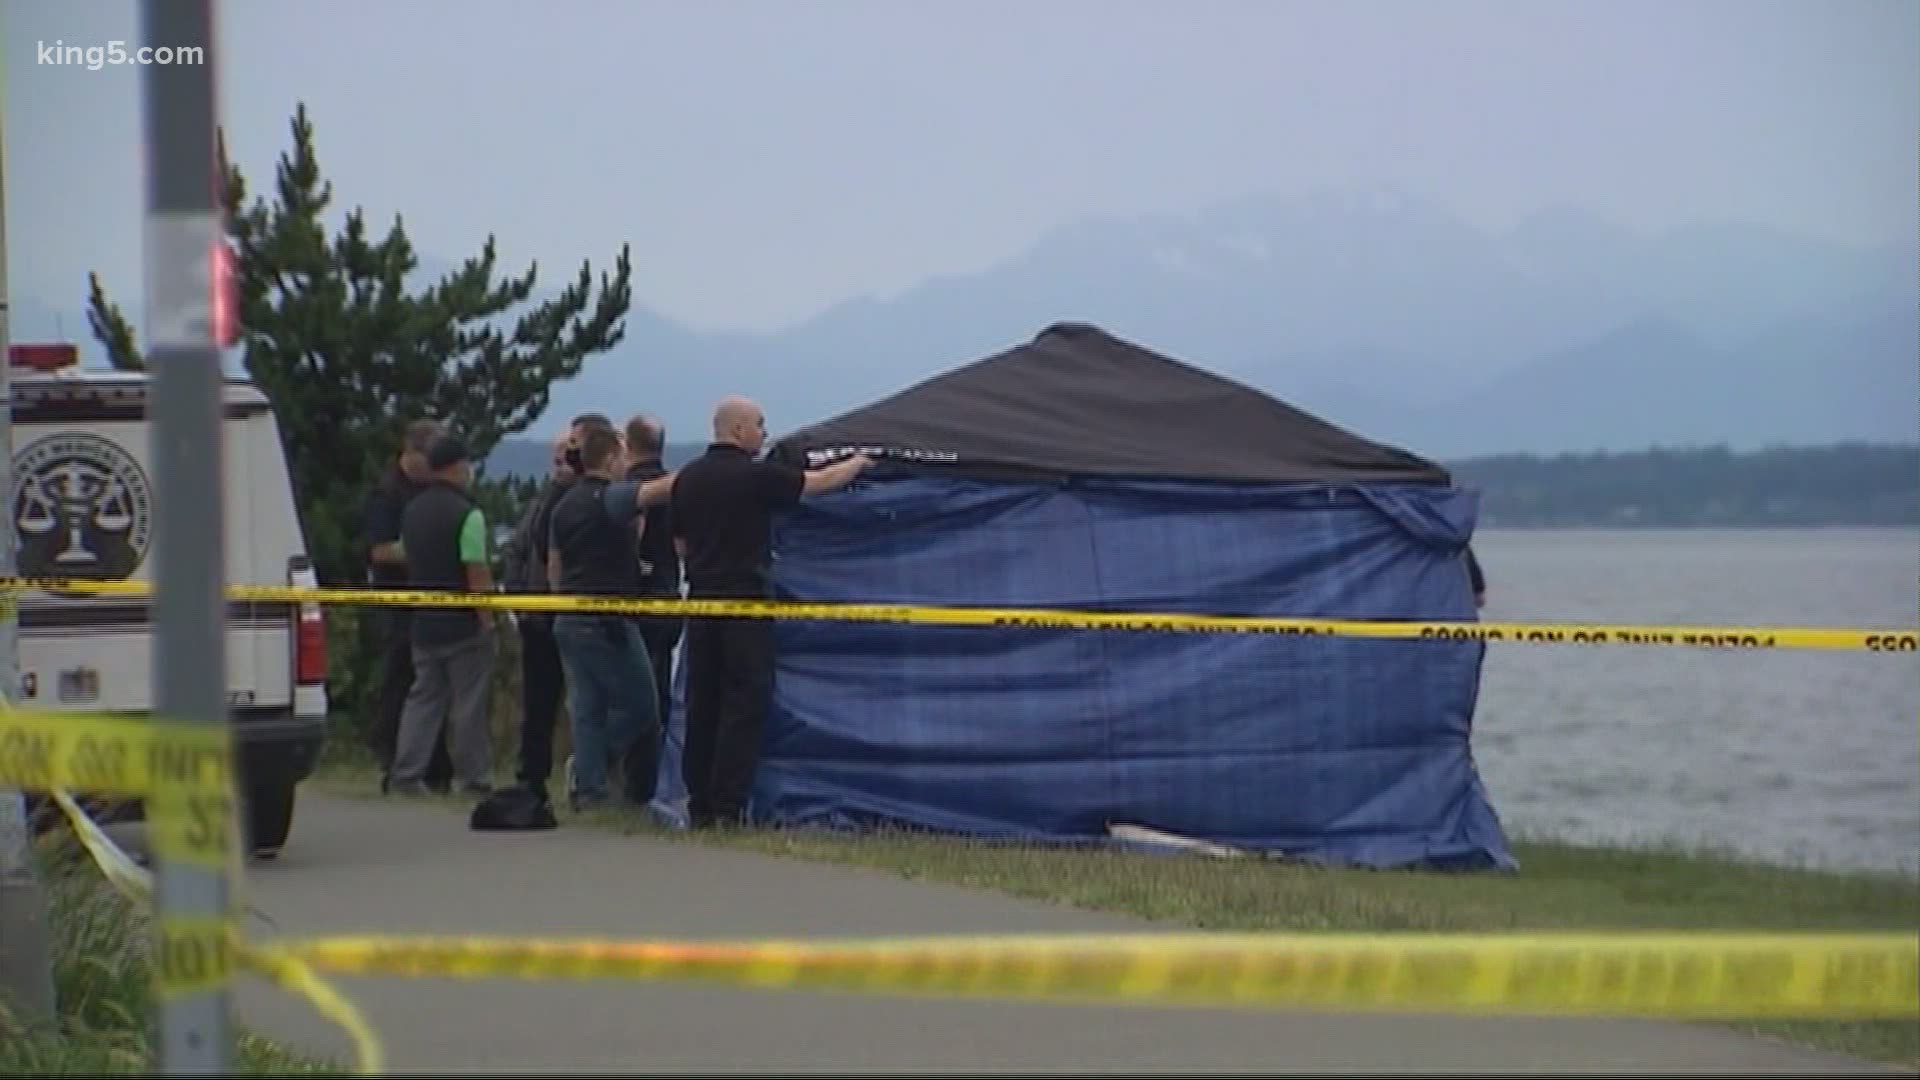 Police are continuing to investigate after human remains were found in suitcases on Alki Beach in Seattle. The identity of the victim is unknown.